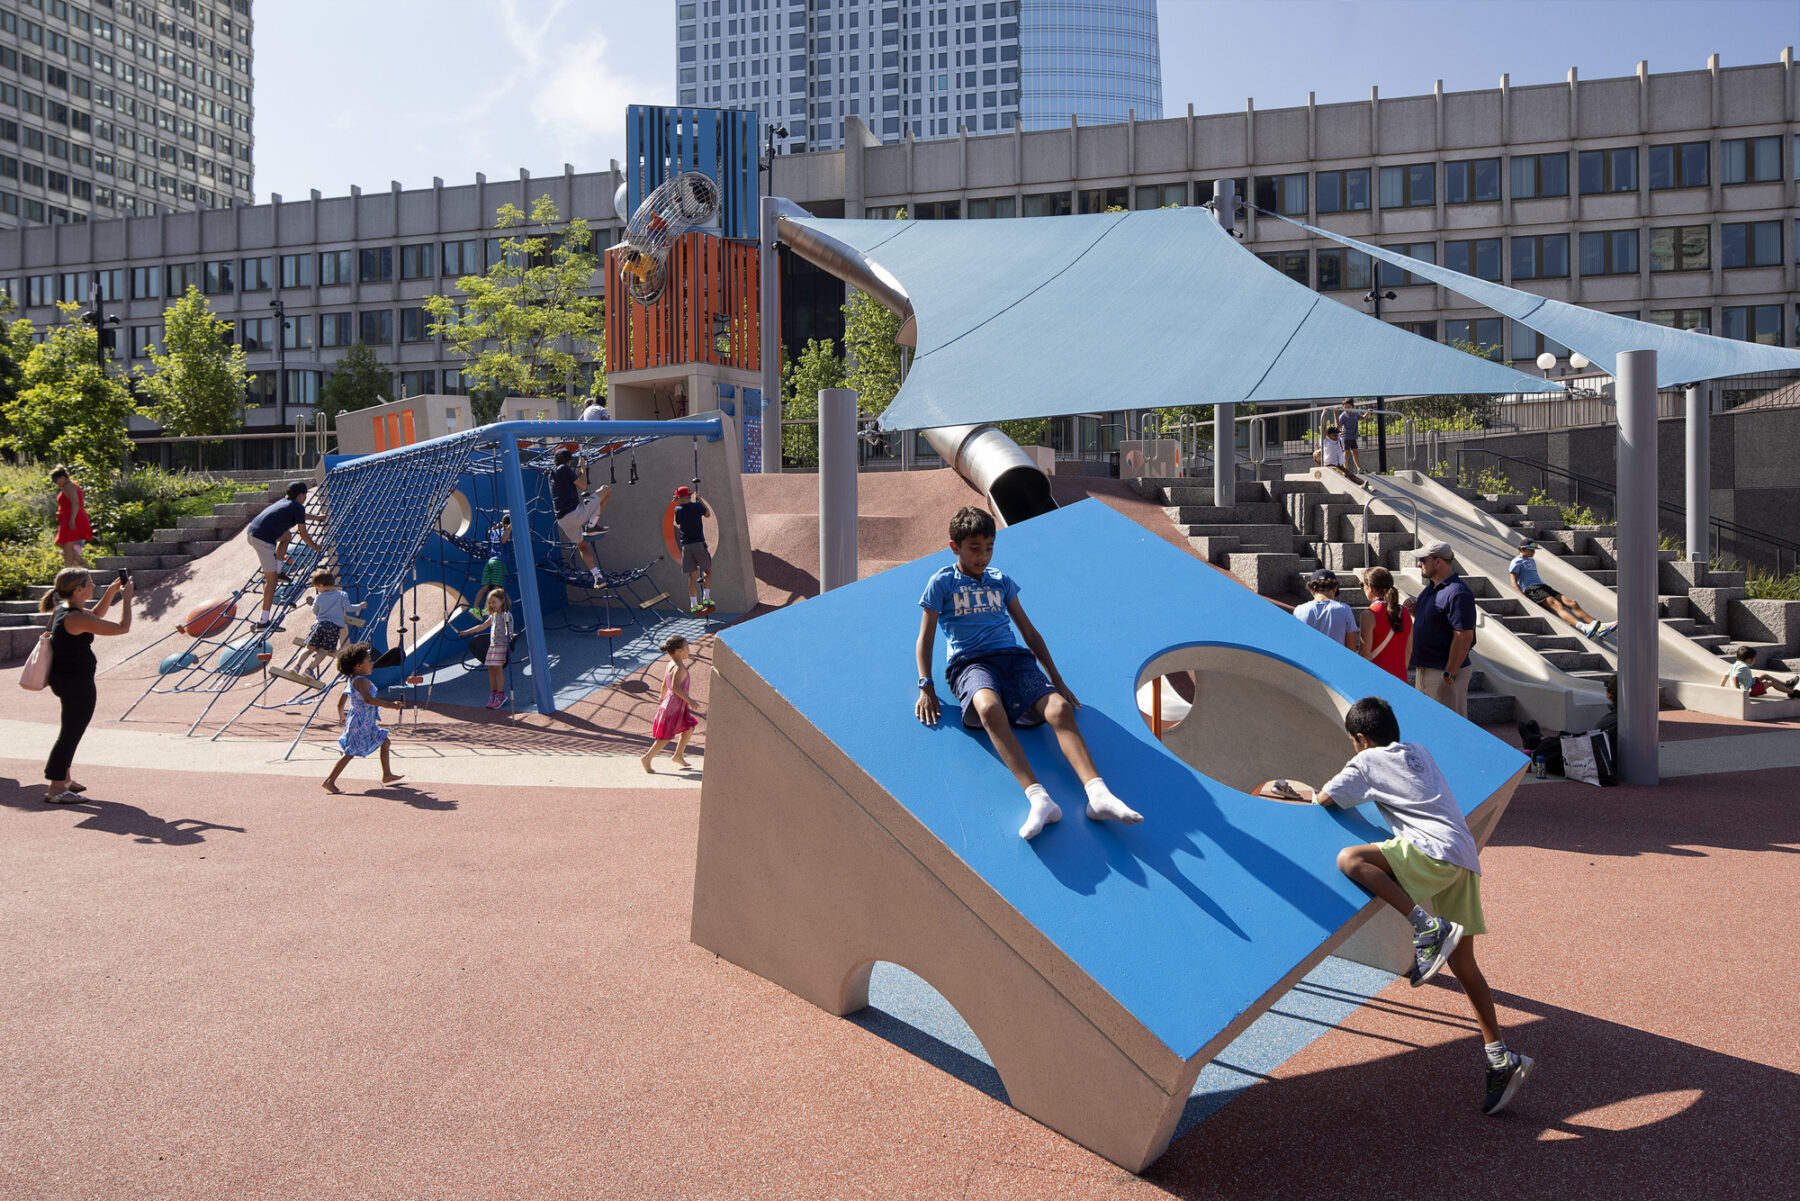 Two boys climbing on cube play structure in foreground of the play space with children running and climbing on play equipment in background